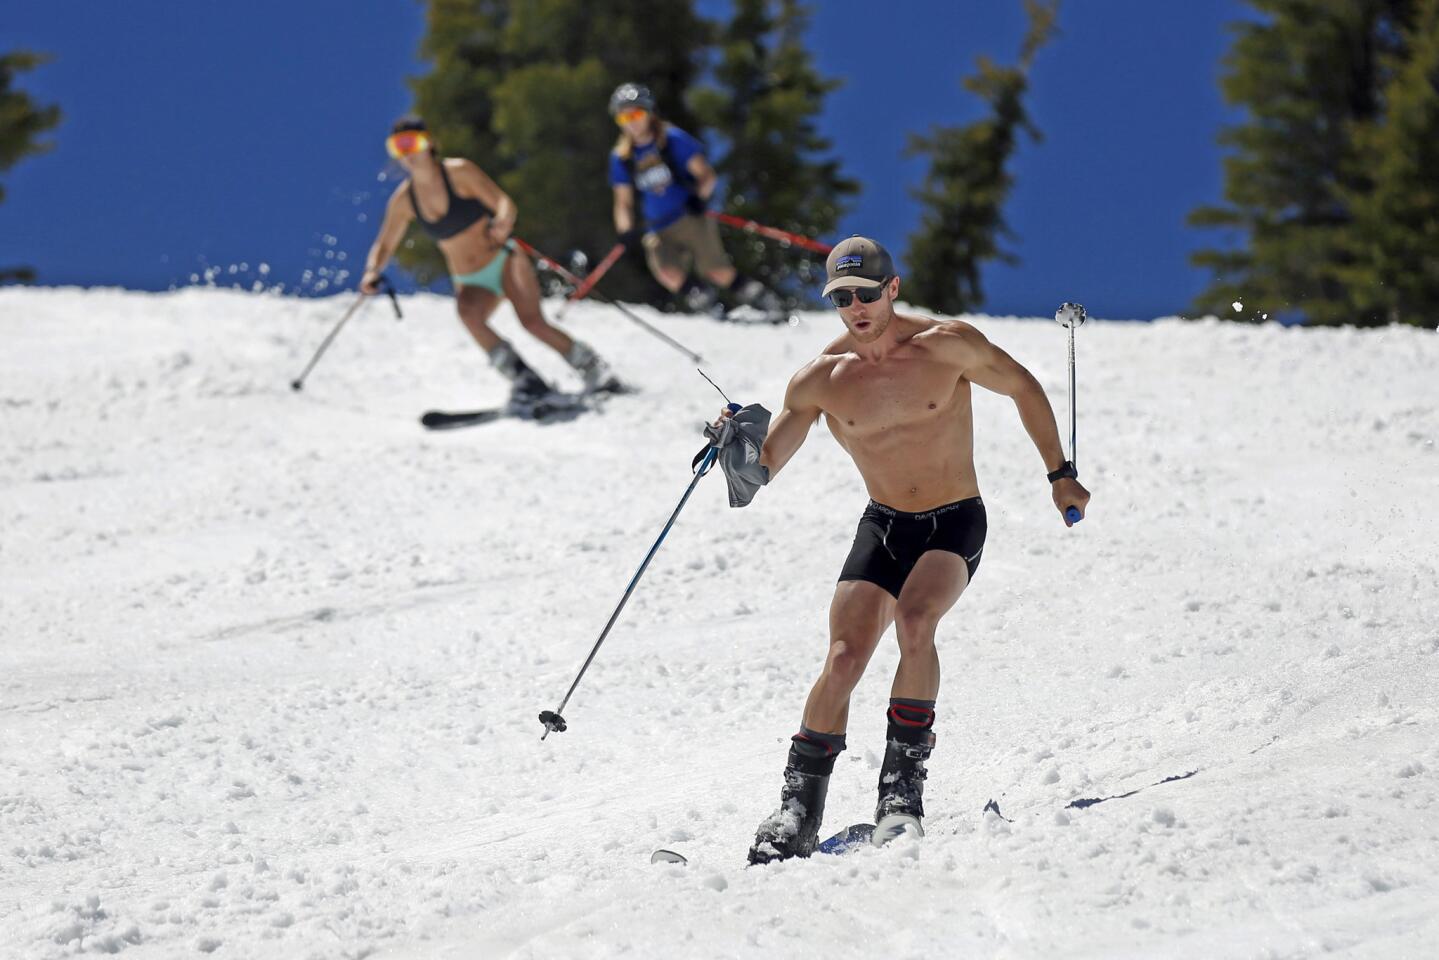 Bikini tops and snowcaps: Skiers at Squaw Valley Ski Resort in Olympic Valley, Calif.